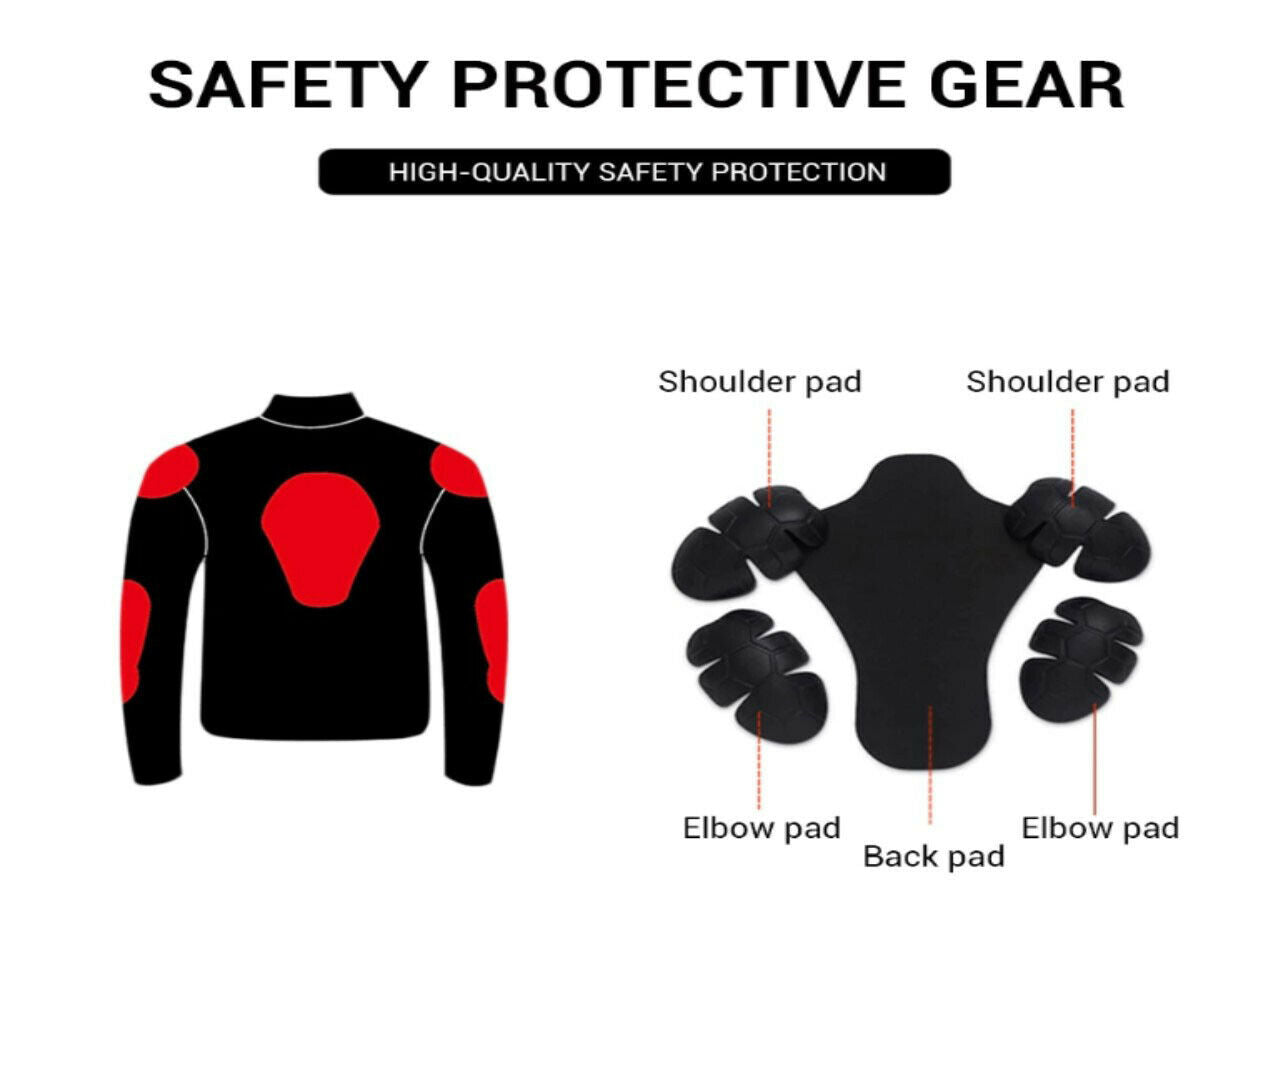 Premium Protective Jacket with CE Certified Protections by Milo Racing